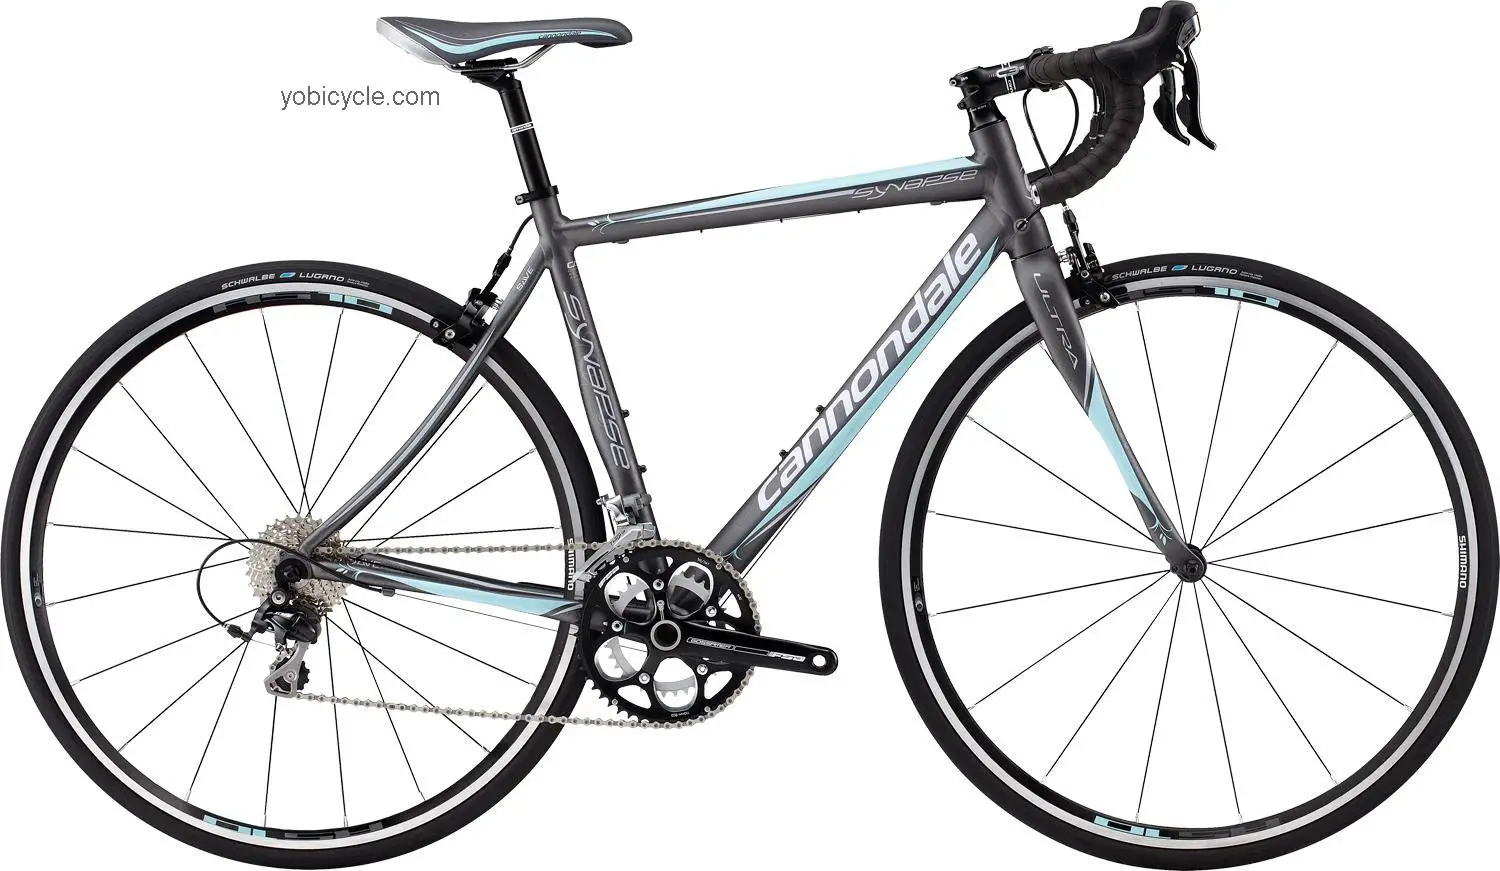 Cannondale Synapse Womens 5 105 2013 comparison online with competitors